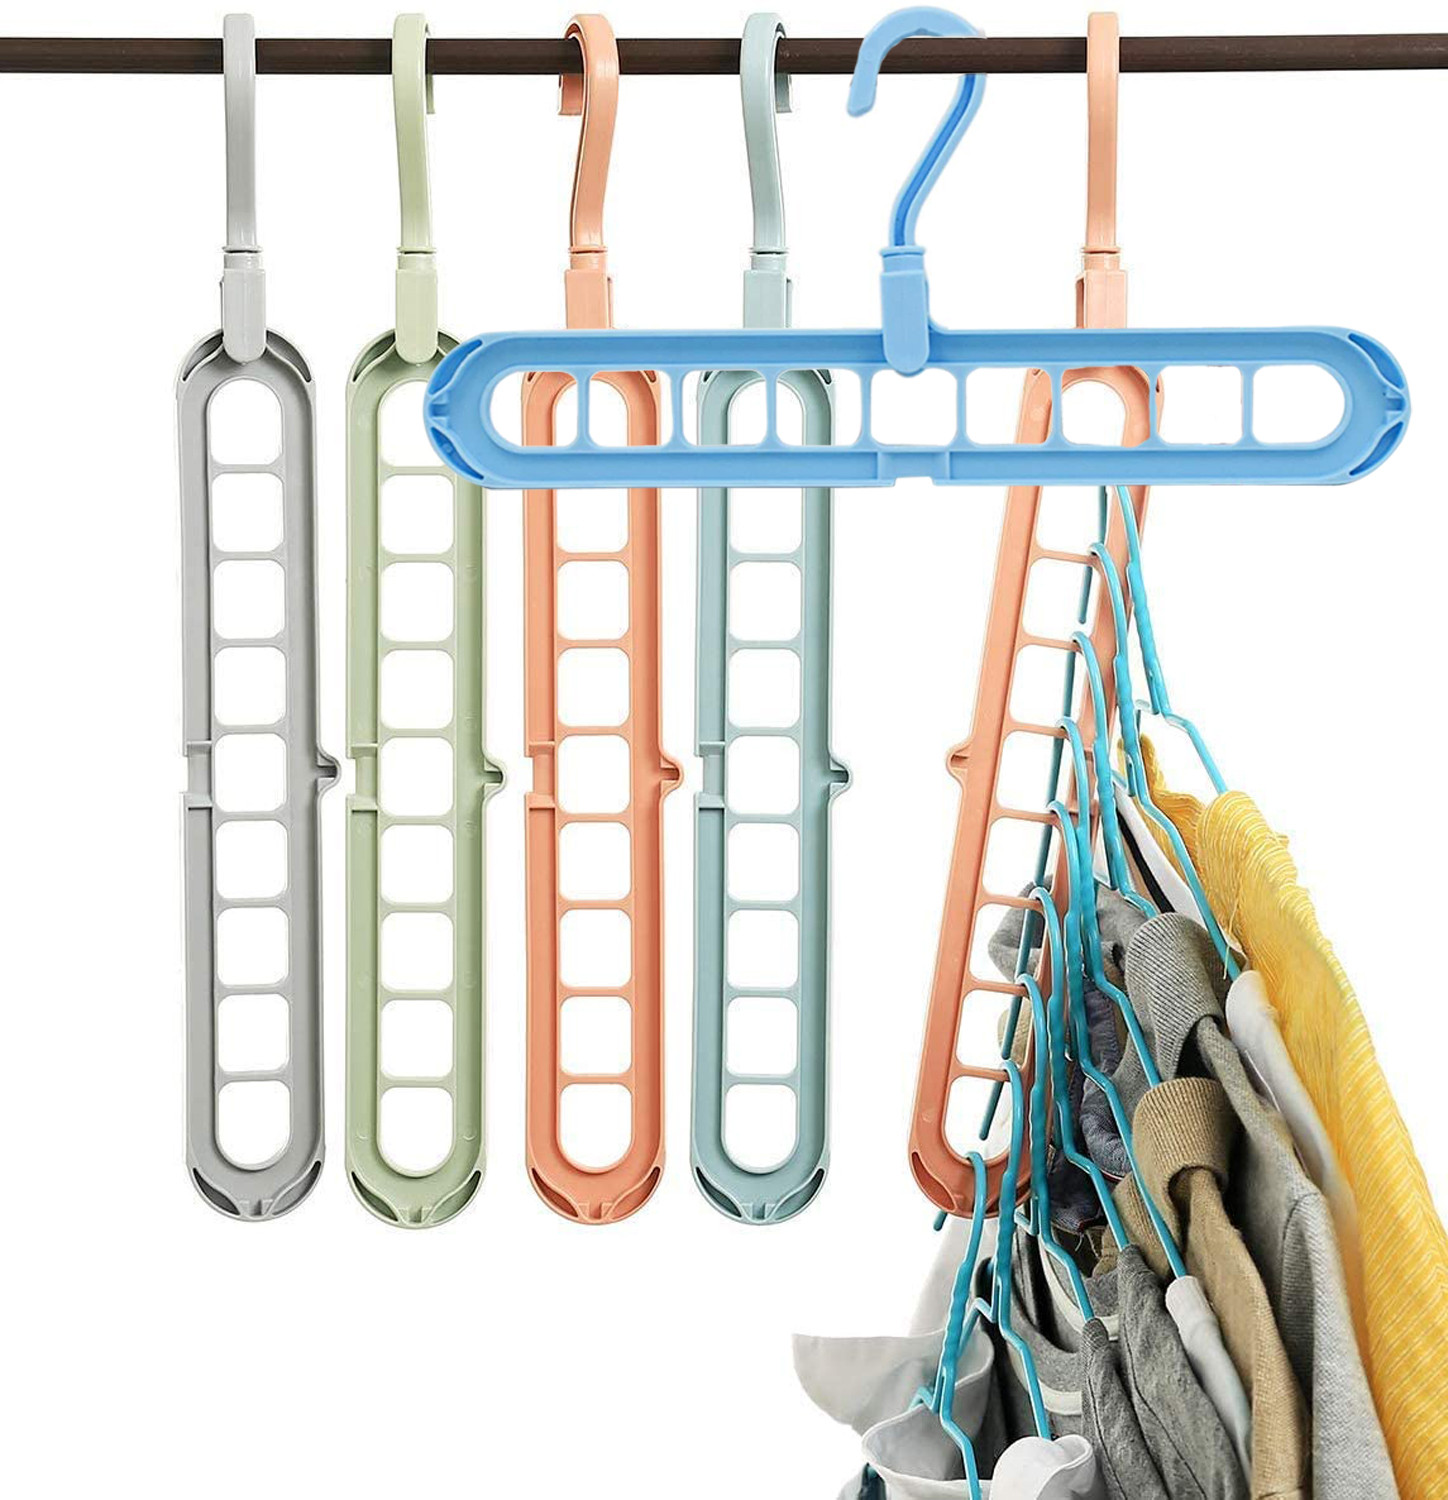 Kuber Industries Plastic Hangers for Adult Size Clothing, Plastic, Ideal for Everyday Standard Use Clothes, Shirts, Blouses, T-Shirts, Dresses, Jackets, Suits (Multi)